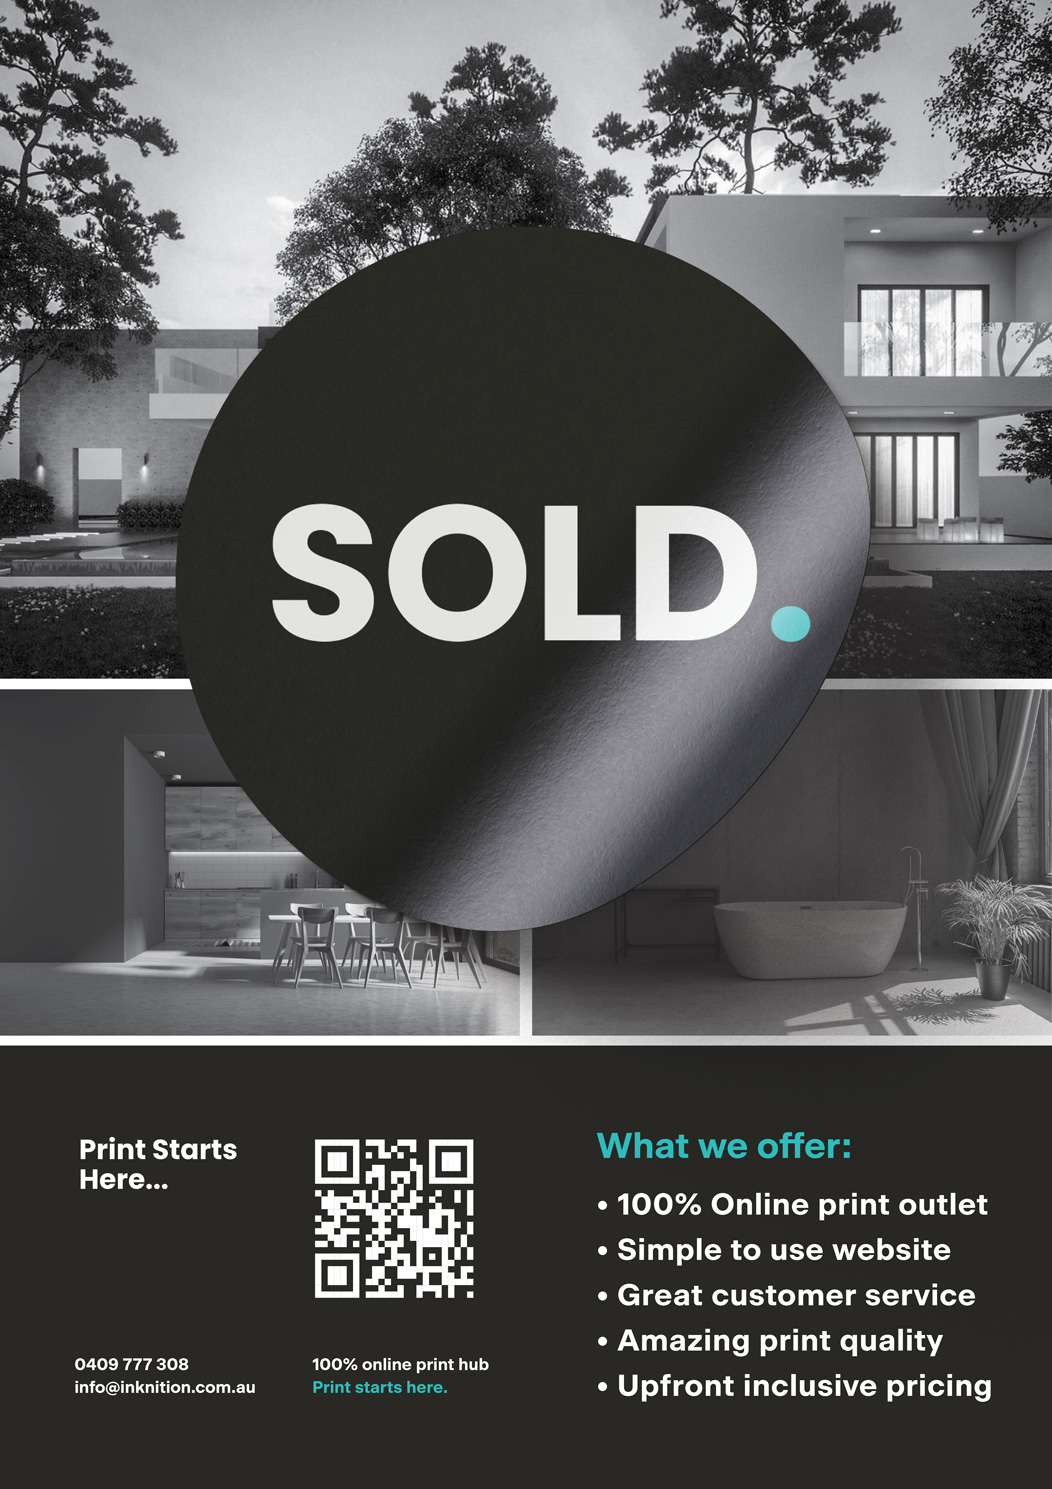 REAL-ESTATE-SOLD-STICKER-OVERLAYED-ONTO-EXISTING-FOR-SALE-SIGN